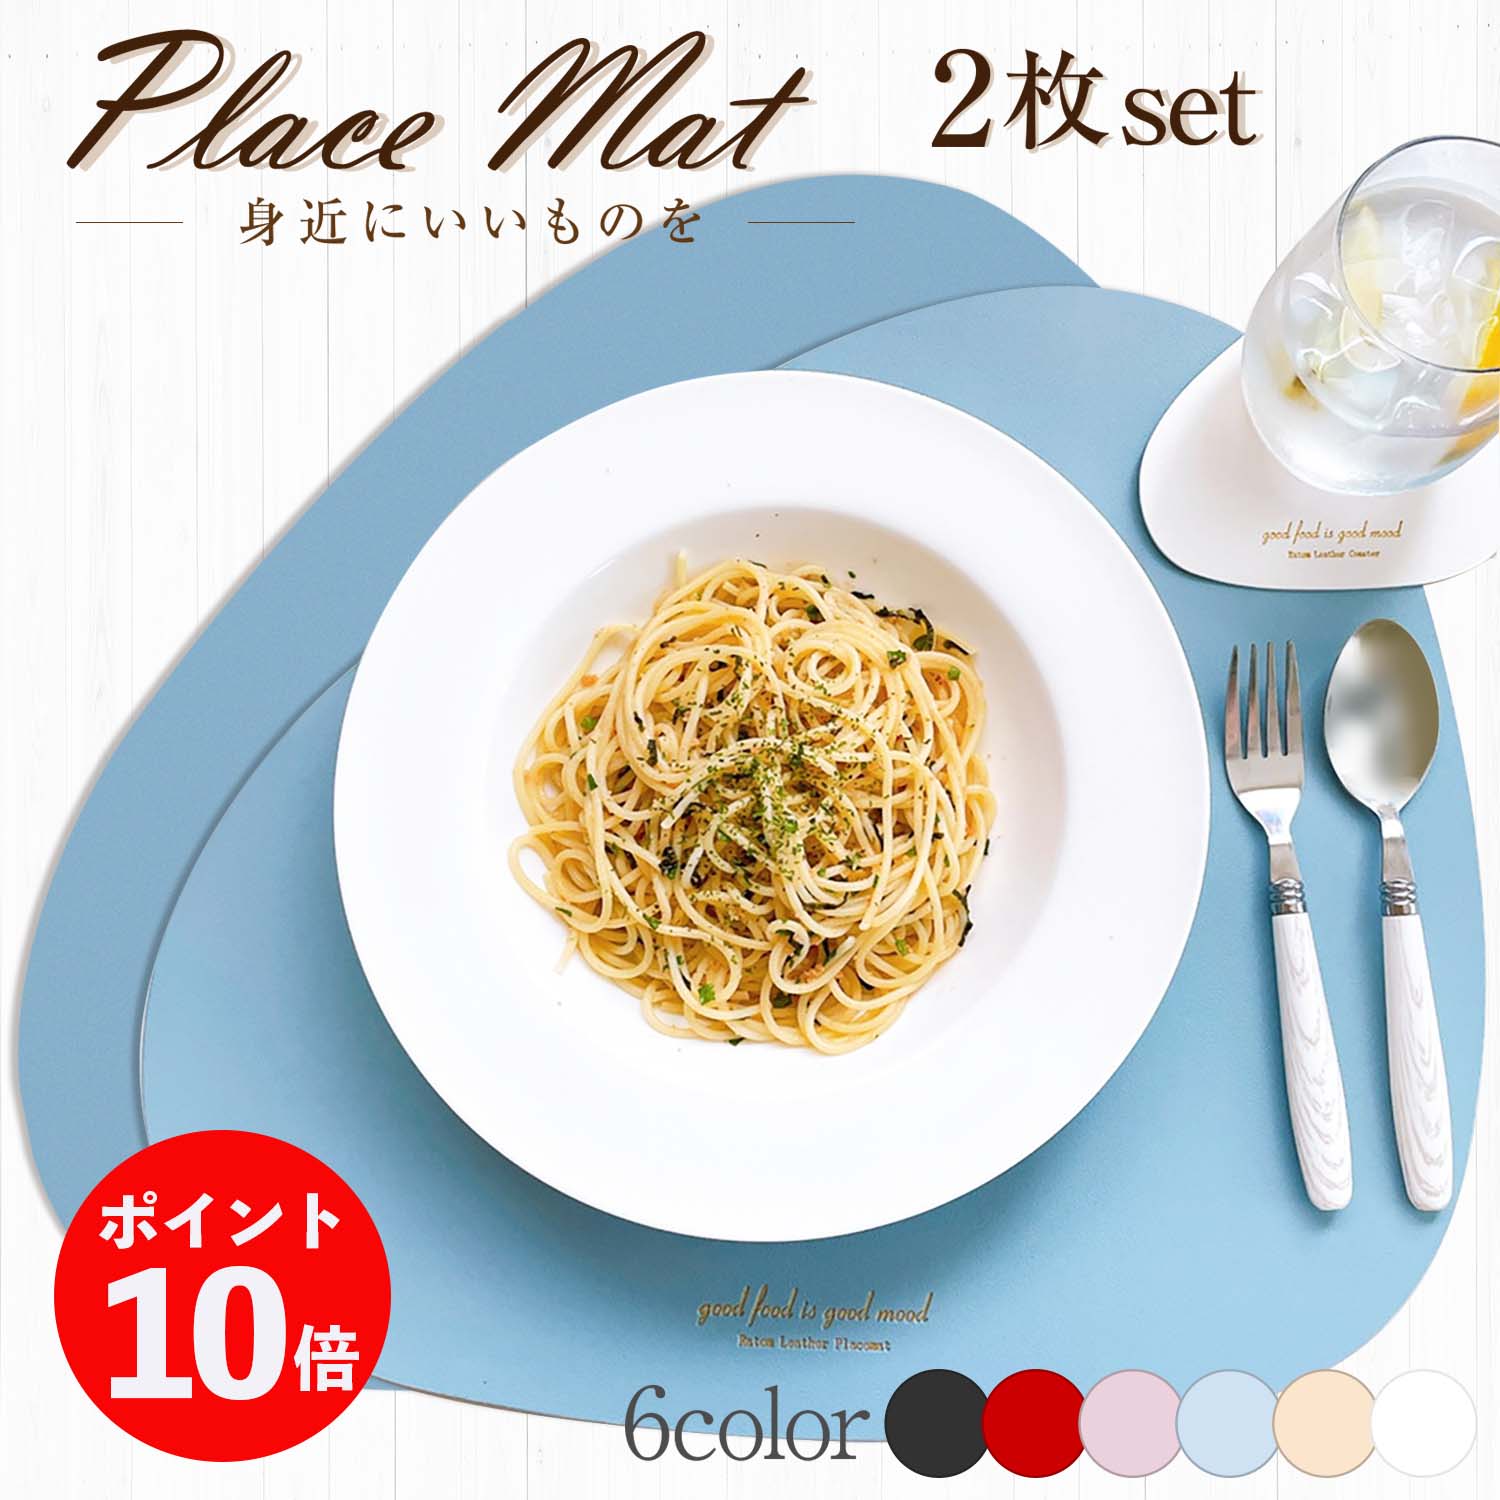 placemat